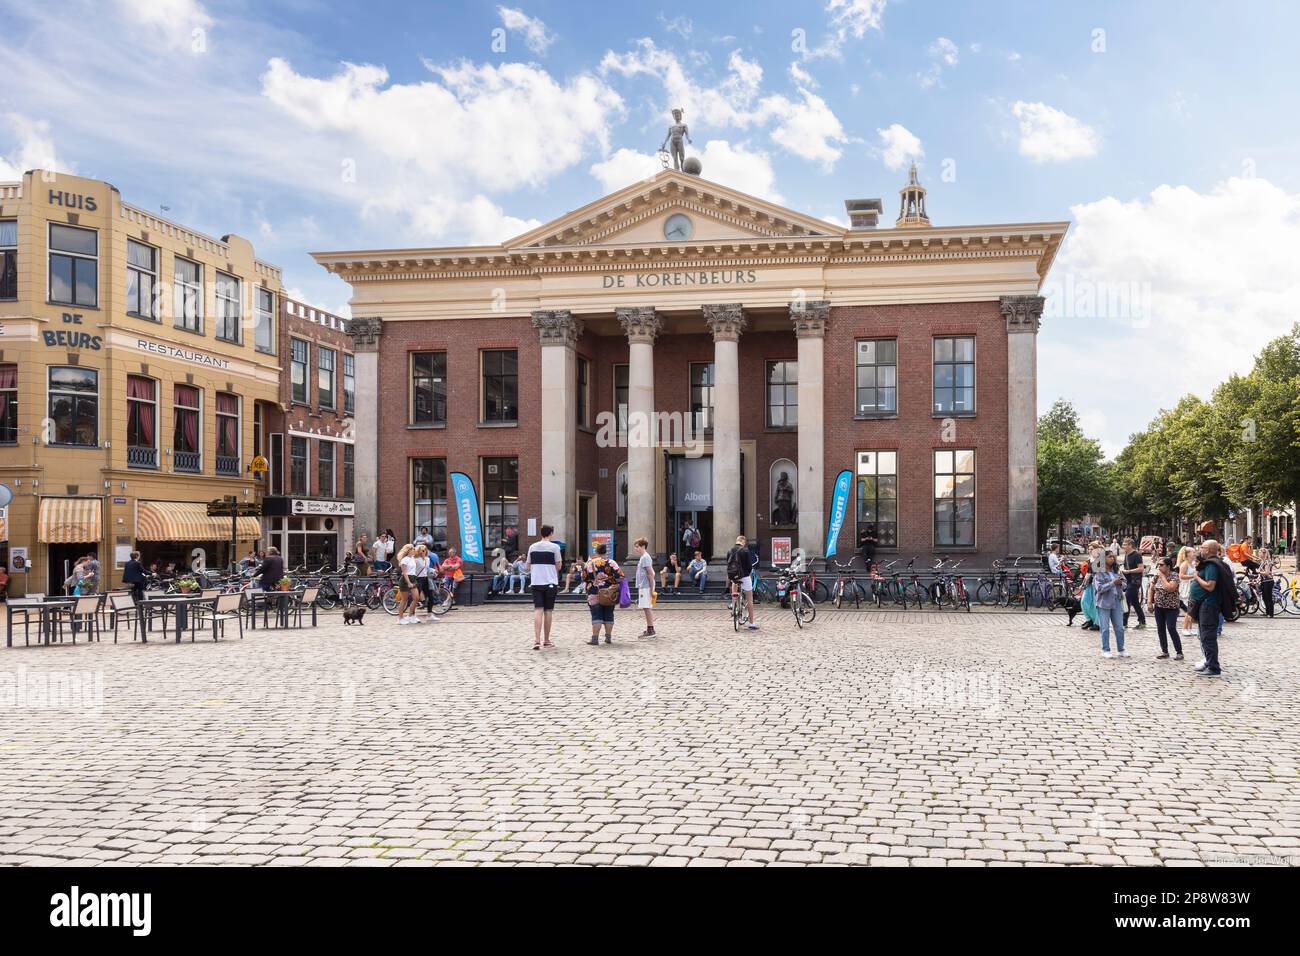 Grain exchange building on the fish market square in the city of Groningen. Stock Photo